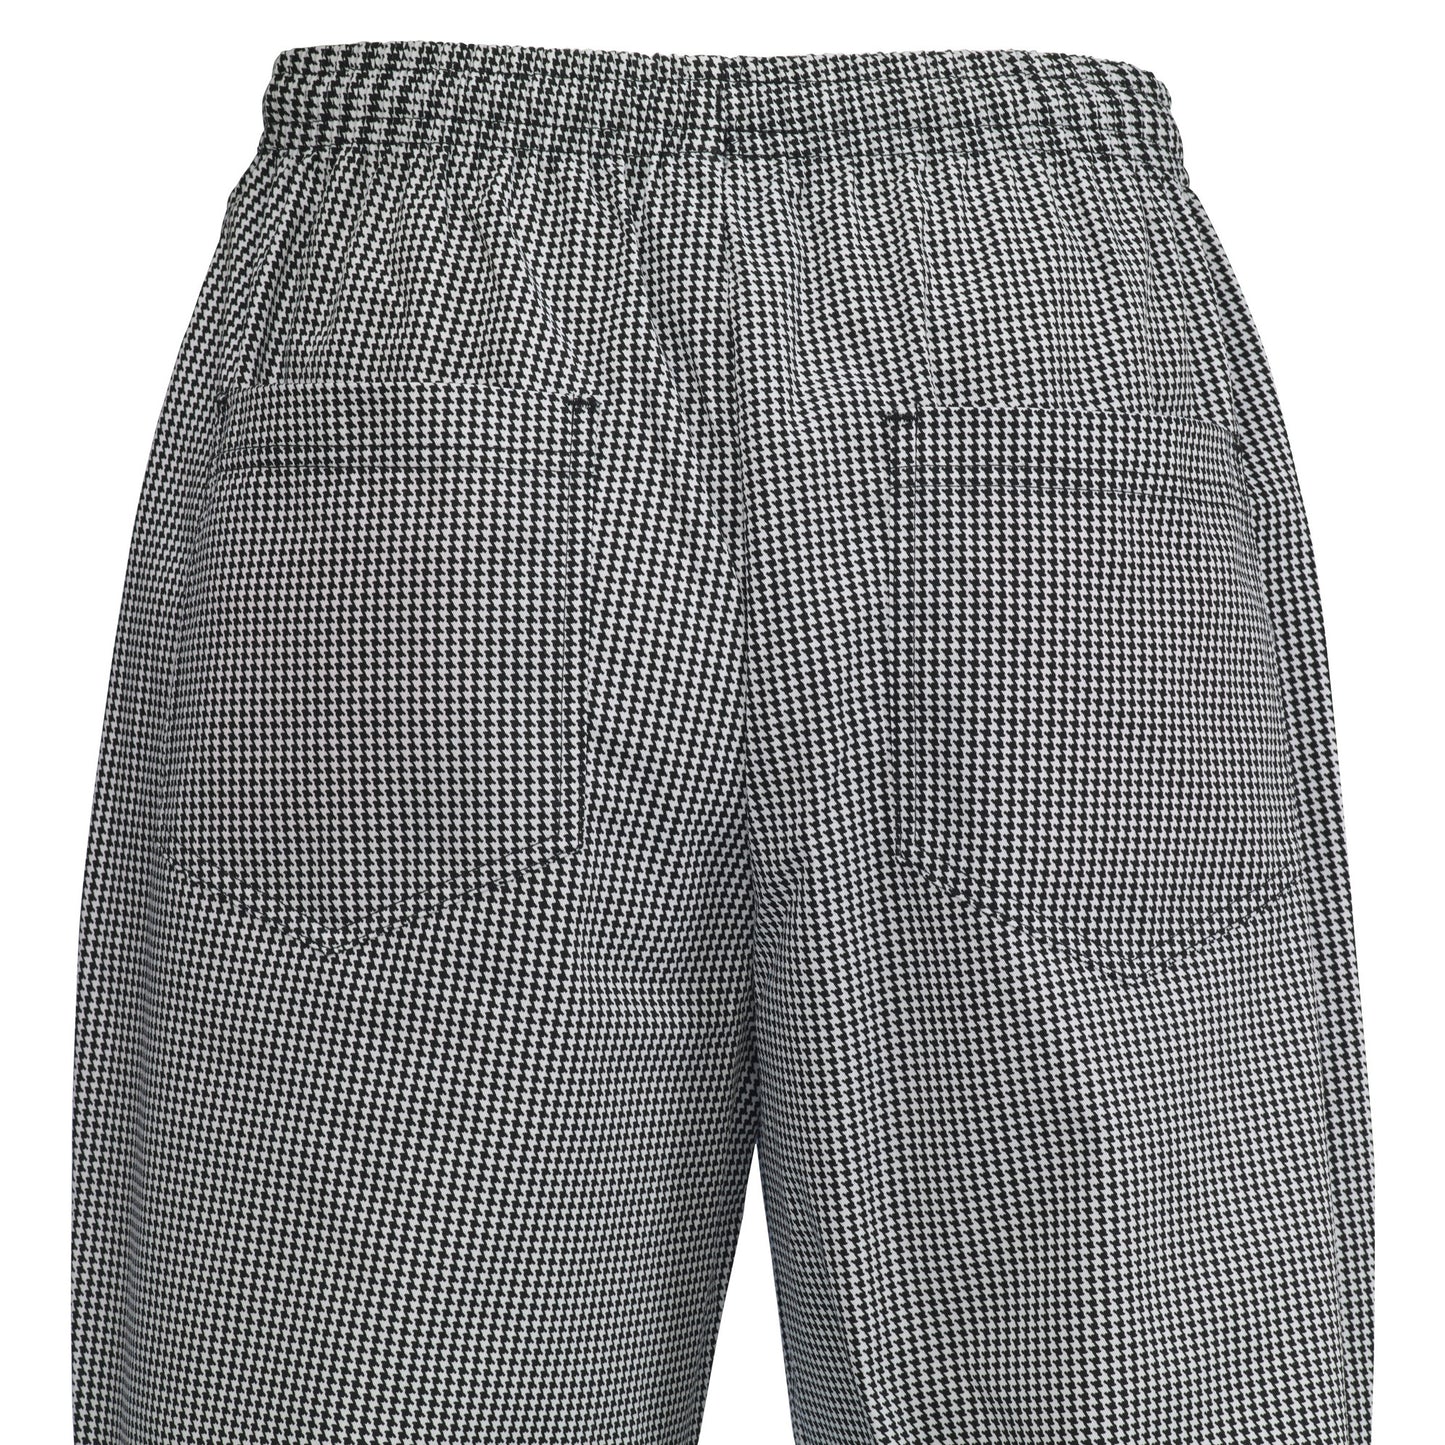 Chef Pants, Houndstooth - Small